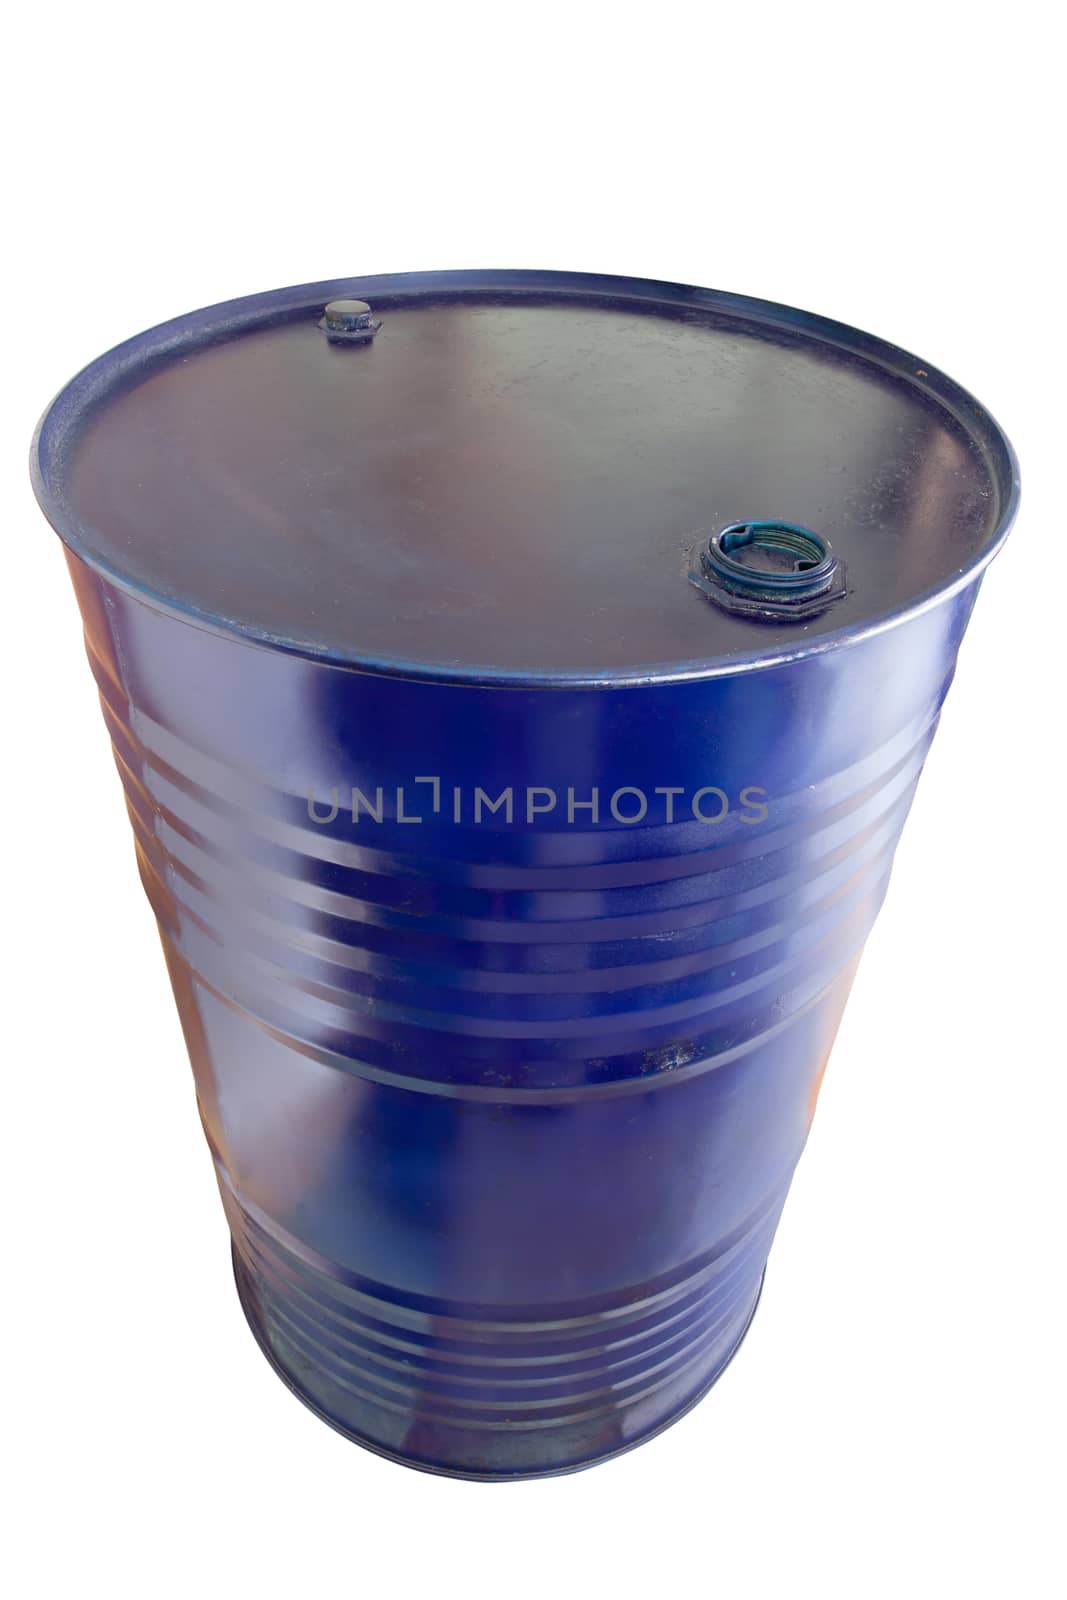 Two hundred liter oil barrels blue color on white background. object with work paths.
